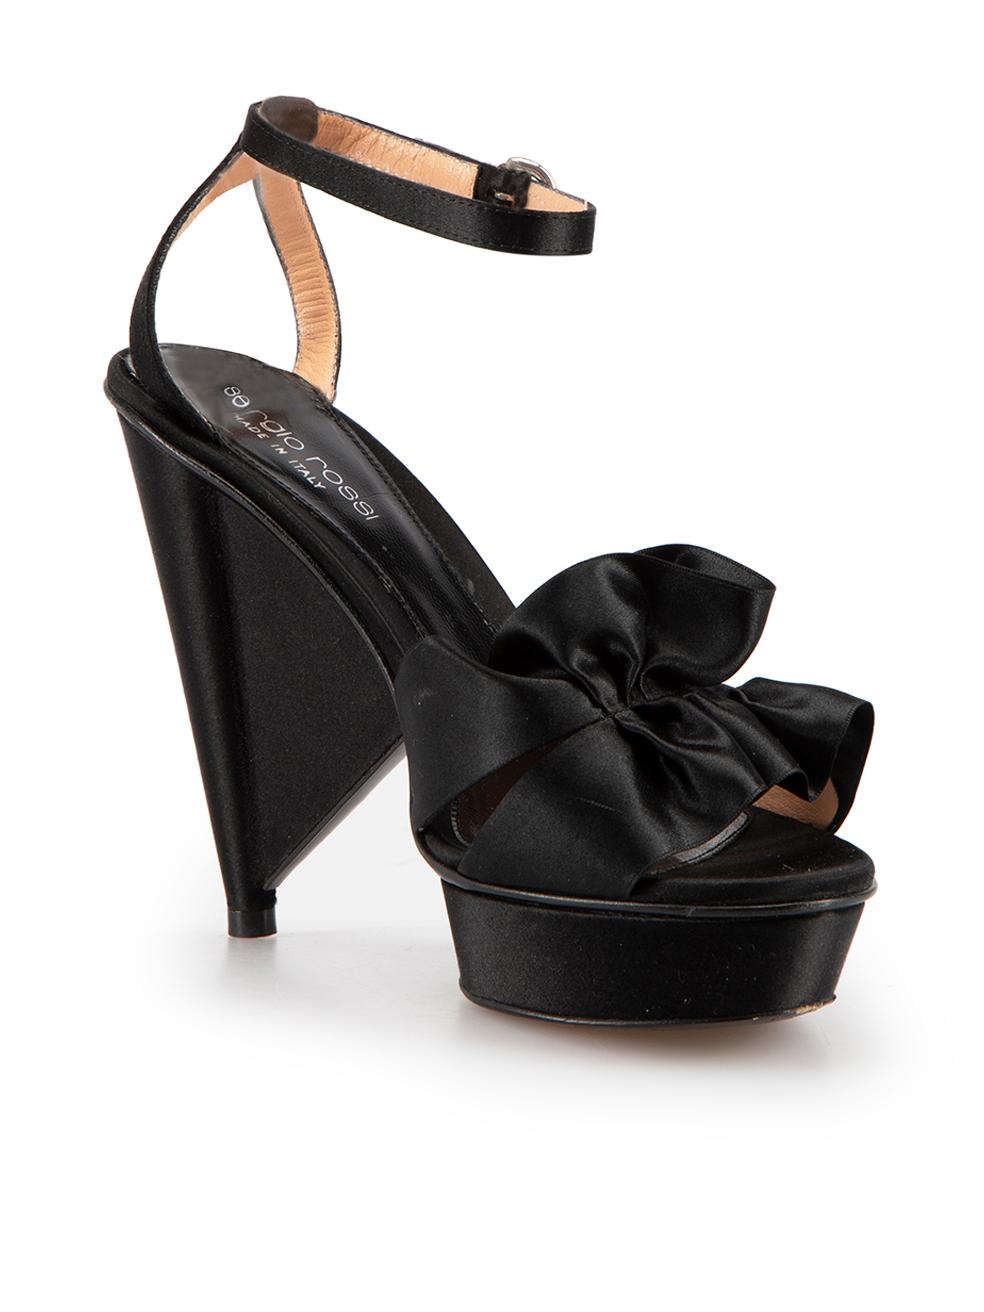 CONDITION is Very good. Minimal wear to heels is evident. Minimal wear to upper however some chipping and damage to outsoles seen on this used Sergio Rossi designer resale item.



Details


Black

Cloth

Heeled sandals

Platform

Ruffle detail